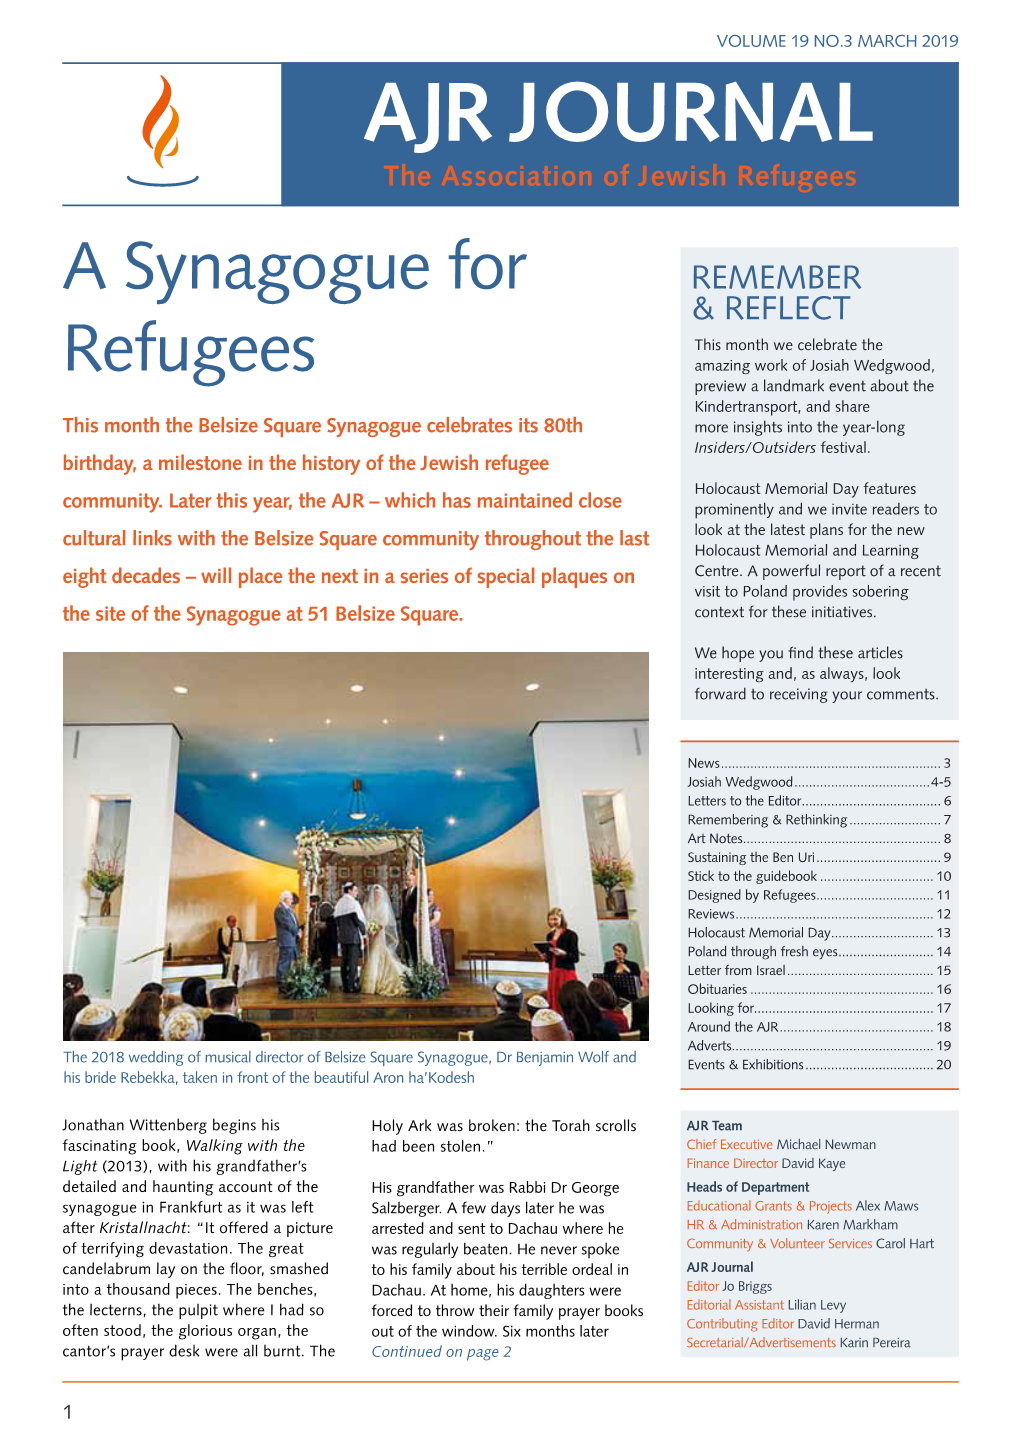 The Association of Jewish Refugees